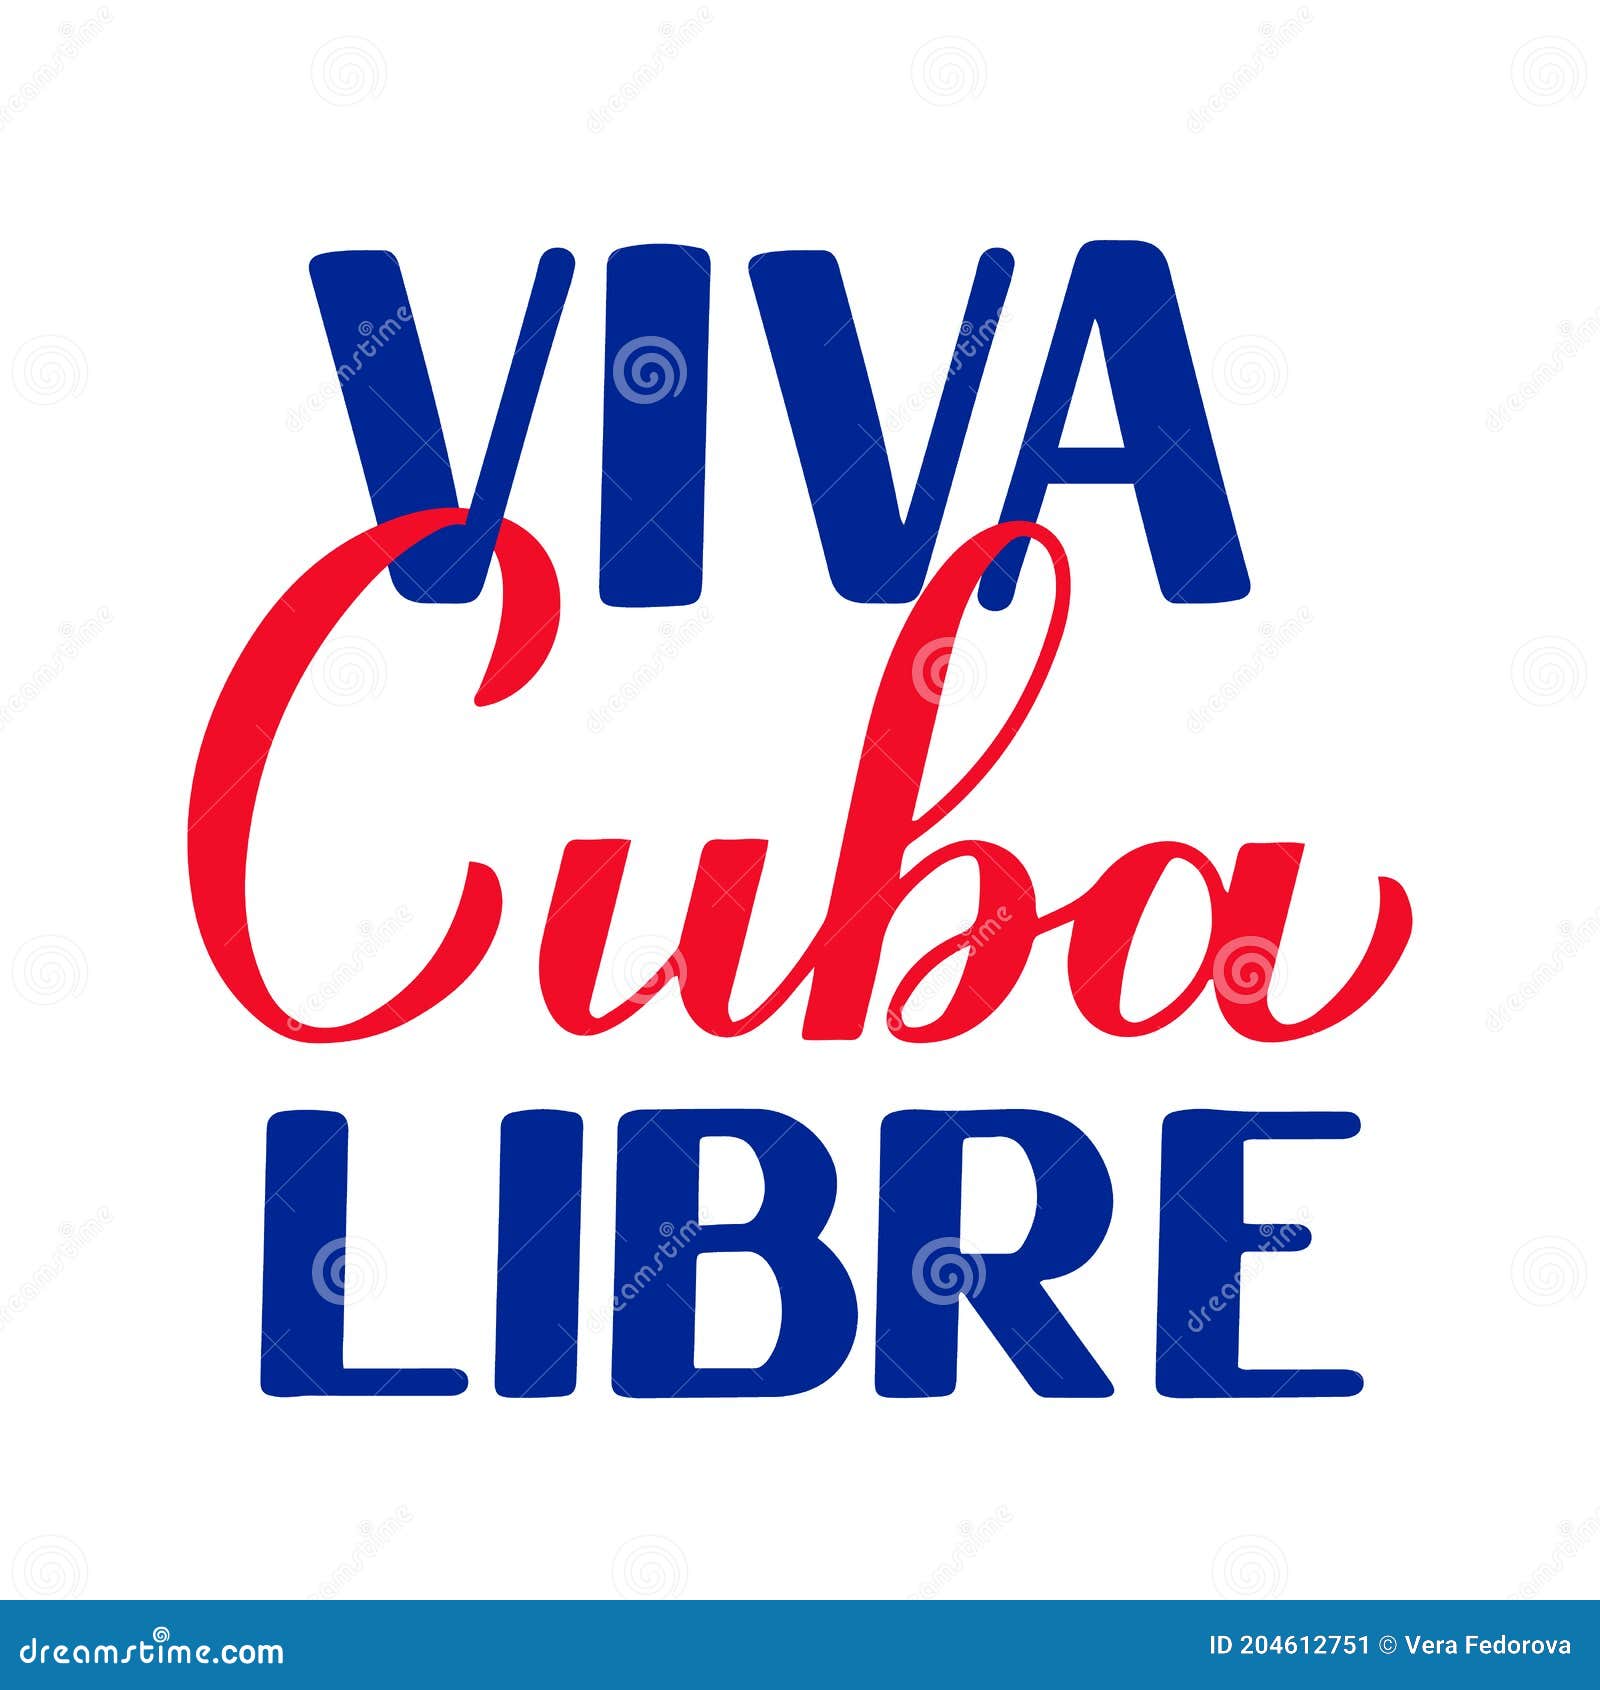 Download Viva Cuba Libre Long Live Free Cuba In Spanish Calligraphy Hand Lettering For Cuban Revolution Day Celebrate On January 1 Stock Vector Illustration Of National America 204612751